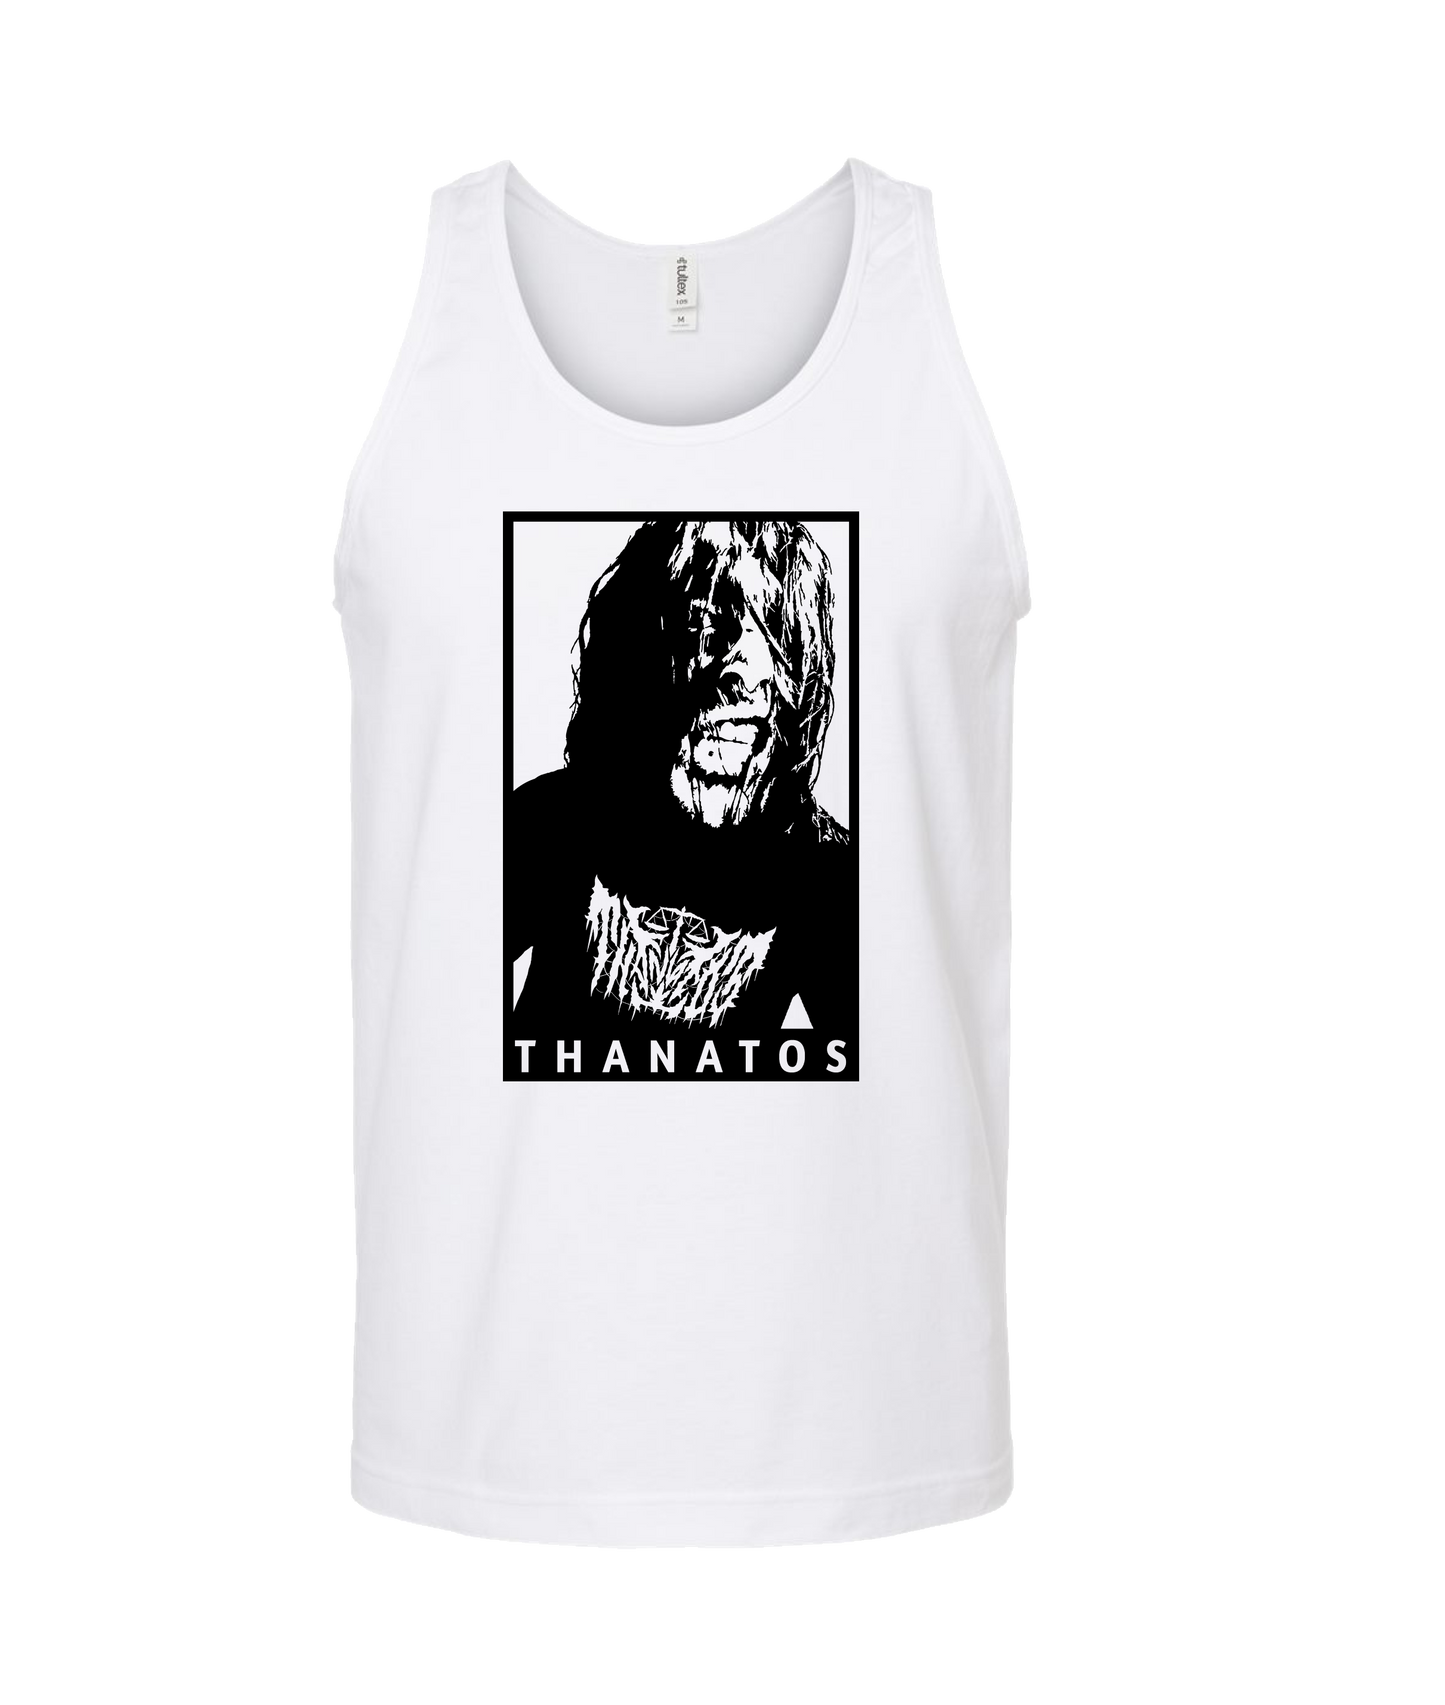 Thanatos - Better the Devil You Know Than the One You Don't - White Tank Top